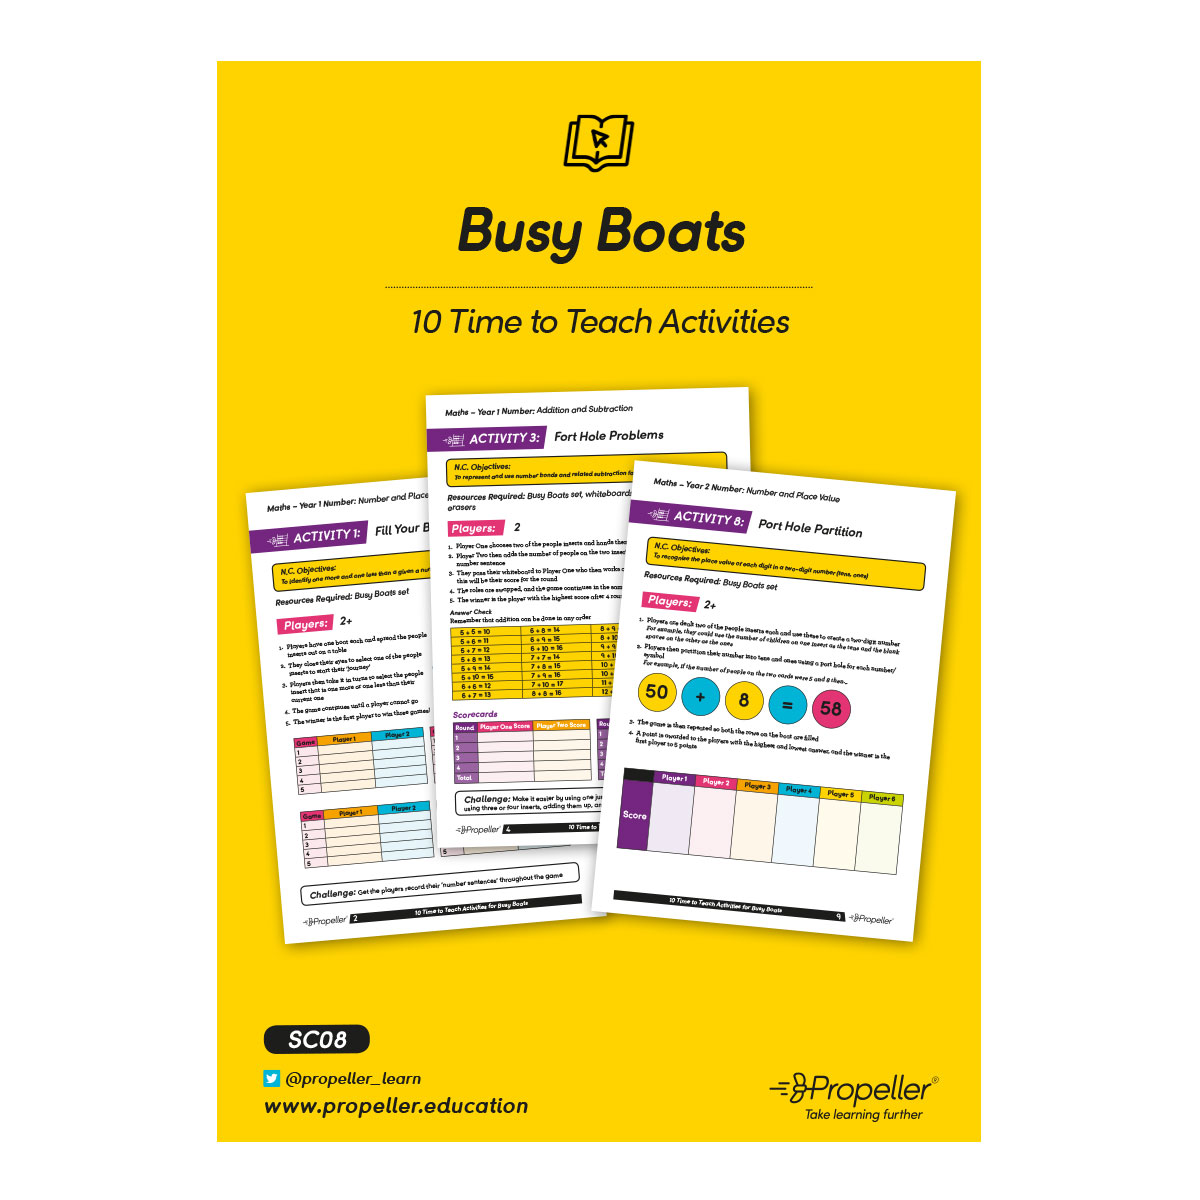 'Busy Boats' Teaching Activities